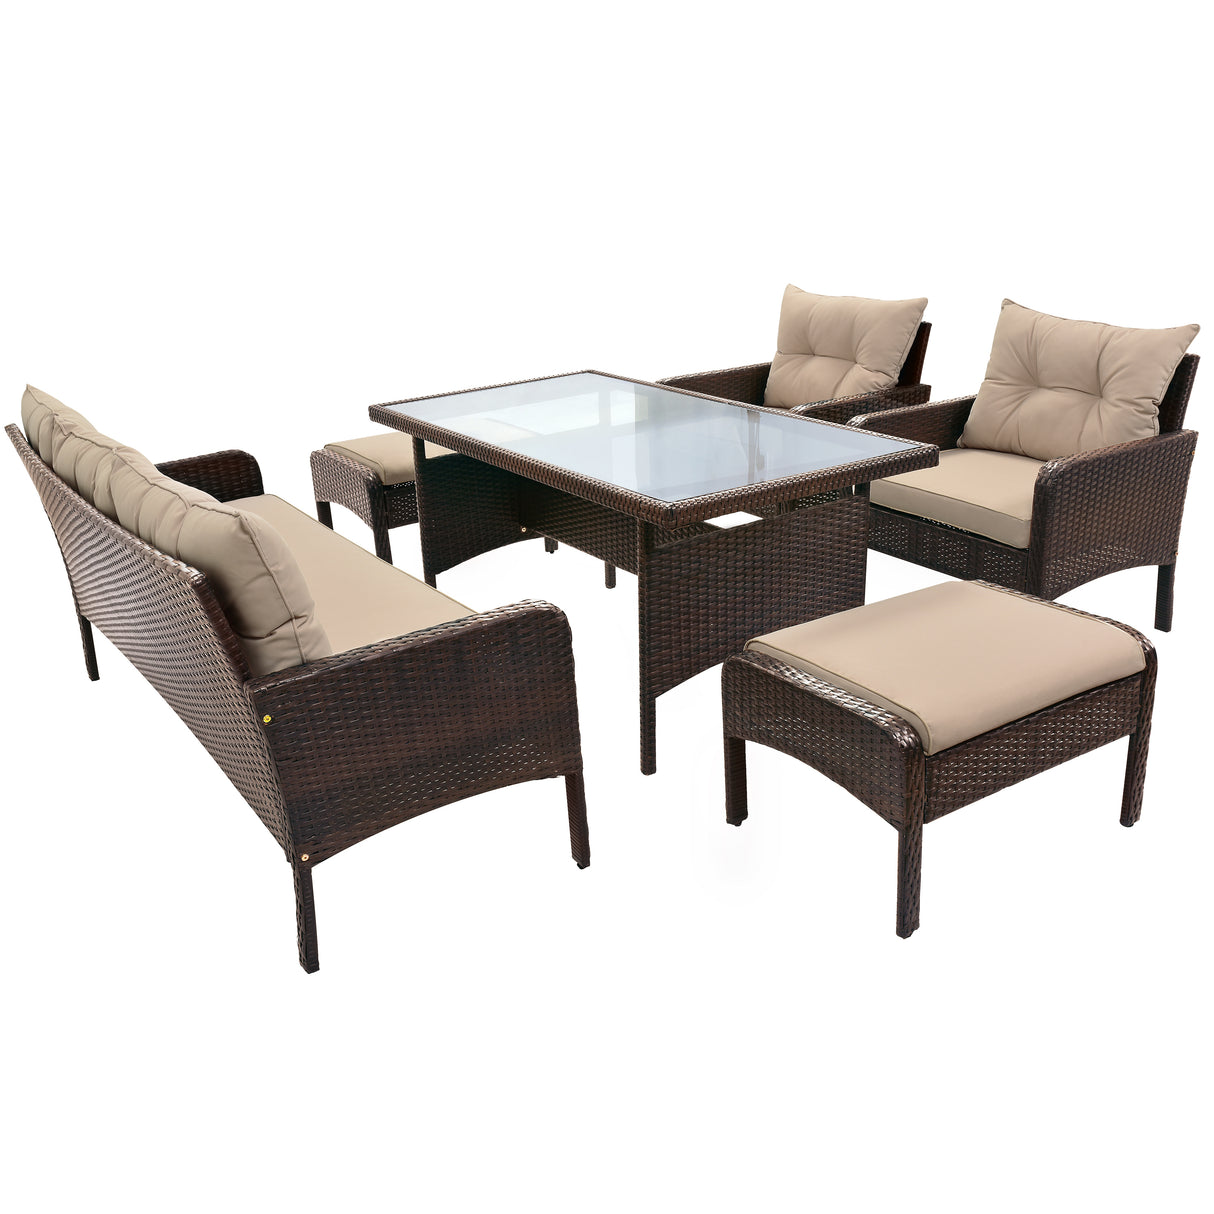 TOPMAX 6-Piece Outdoor Patio PE Wicker Rattan Sofa Set Dining Table Set with Removable Cushions and Tempered Glass Tea Table for Backyard, Poolside, Deck, Brown Wicker+Light Coffee Cushion